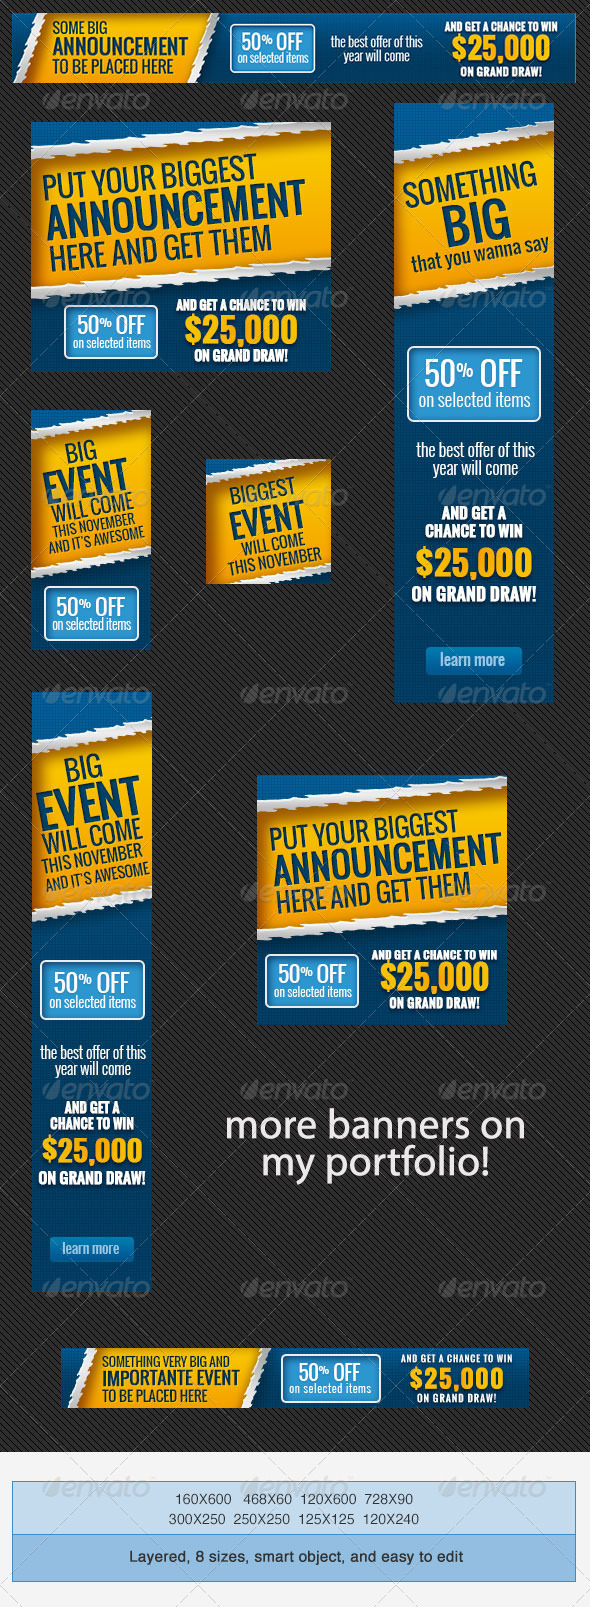 Big Event Banner Ads PSD Template by admiral adictus 